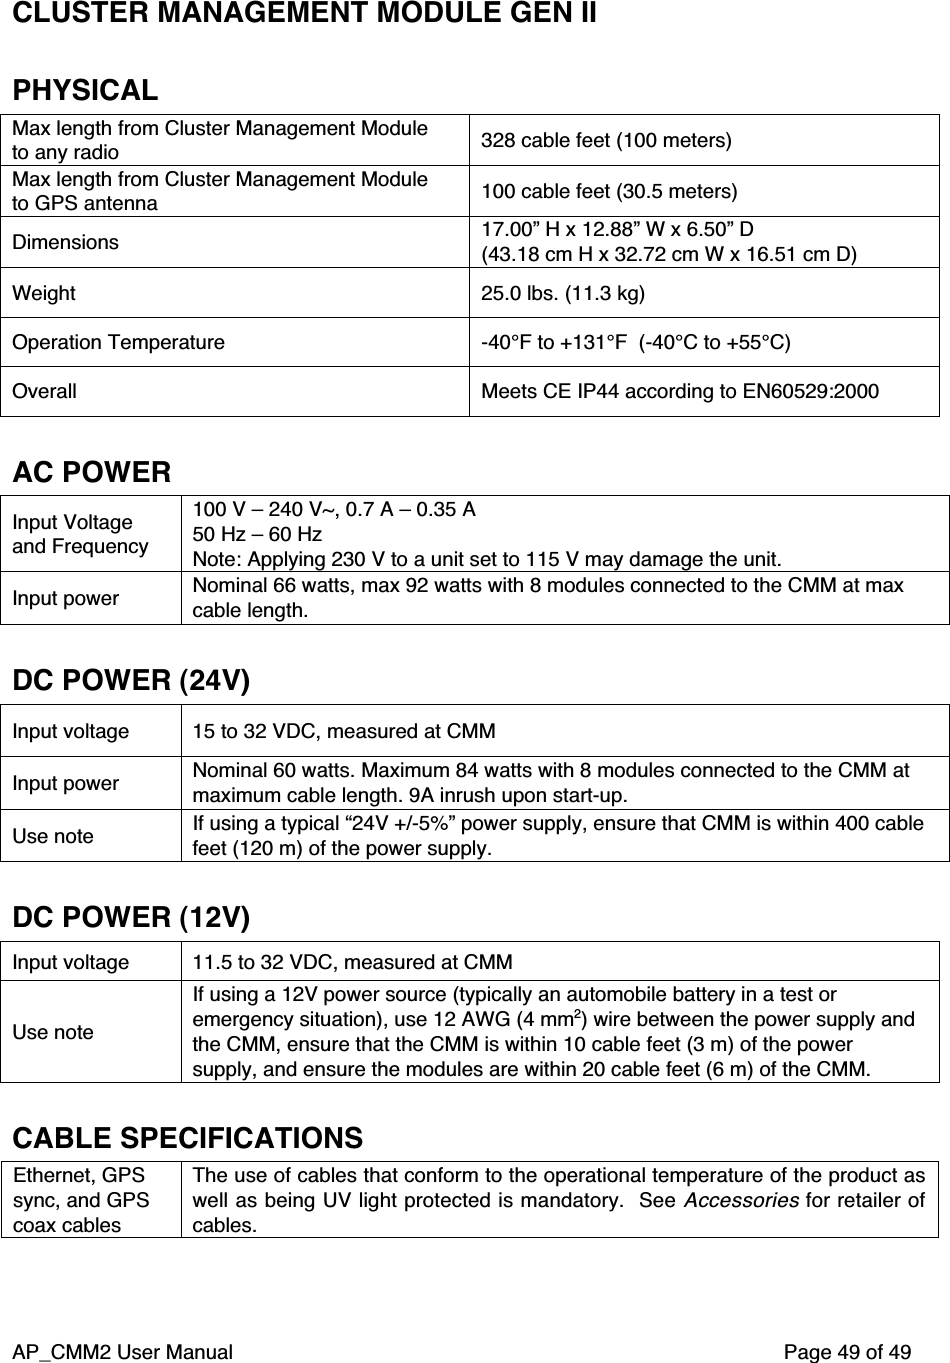 AP_CMM2 User Manual Page 49 of 49CLUSTER MANAGEMENT MODULE GEN IIPHYSICALMax length from Cluster Management Moduleto any radio 328 cable feet (100 meters)Max length from Cluster Management Moduleto GPS antenna 100 cable feet (30.5 meters)Dimensions 17.00” H x 12.88” W x 6.50” D(43.18 cm H x 32.72 cm W x 16.51 cm D)Weight 25.0 lbs. (11.3 kg)Operation Temperature -40°F to +131°F  (-40°C to +55°C)Overall Meets CE IP44 according to EN60529:2000AC POWERInput Voltageand Frequency100 V – 240 V~, 0.7 A – 0.35 A50 Hz – 60 HzNote: Applying 230 V to a unit set to 115 V may damage the unit.Input power Nominal 66 watts, max 92 watts with 8 modules connected to the CMM at maxcable length.DC POWER (24V)Input voltage 15 to 32 VDC, measured at CMMInput power Nominal 60 watts. Maximum 84 watts with 8 modules connected to the CMM atmaximum cable length. 9A inrush upon start-up.Use note If using a typical “24V +/-5%” power supply, ensure that CMM is within 400 cablefeet (120 m) of the power supply.DC POWER (12V)Input voltage 11.5 to 32 VDC, measured at CMMUse noteIf using a 12V power source (typically an automobile battery in a test oremergency situation), use 12 AWG (4 mm2) wire between the power supply andthe CMM, ensure that the CMM is within 10 cable feet (3 m) of the powersupply, and ensure the modules are within 20 cable feet (6 m) of the CMM.CABLE SPECIFICATIONSEthernet, GPSsync, and GPScoax cablesThe use of cables that conform to the operational temperature of the product aswell as being UV light protected is mandatory.  See Accessories for retailer ofcables.